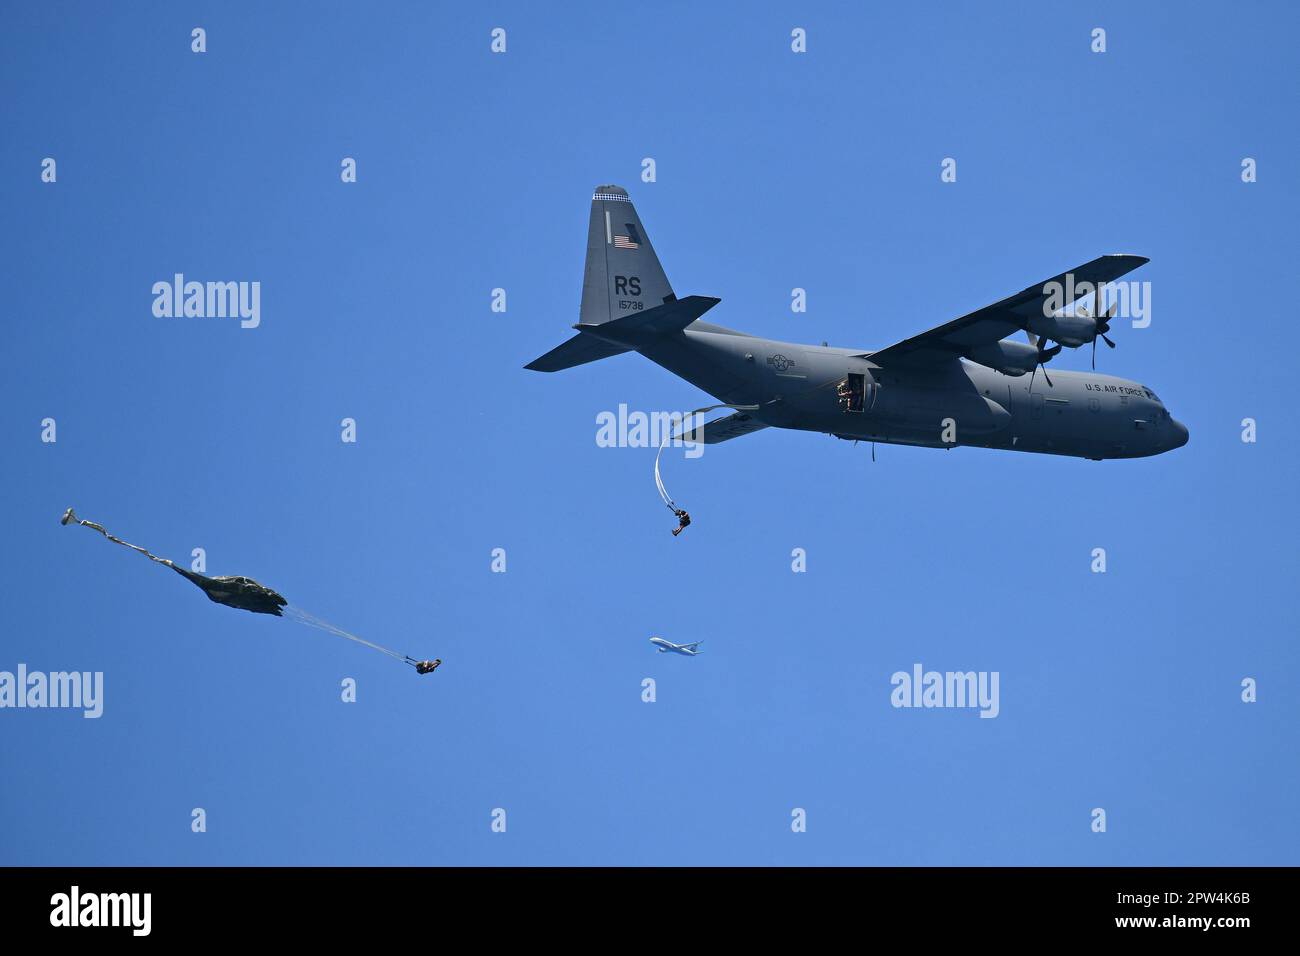 U. S. Army Paratroopers assigned to 173rd Airborne Brigade, exits a U.S. Air Force 86th Air Wing C-130 Hercules aircraft at Lake Garda near Pacengo, Italy, Apr. 26, 2023. The 173rd Airborne Brigade is the U.S. Army Contingency Response Force in Europe, capable of projecting ready forces anywhere in the U.S. European, Africa or Central Commands' areas of responsibility. (U.S. Army photo by Paolo Bovo) Stock Photo